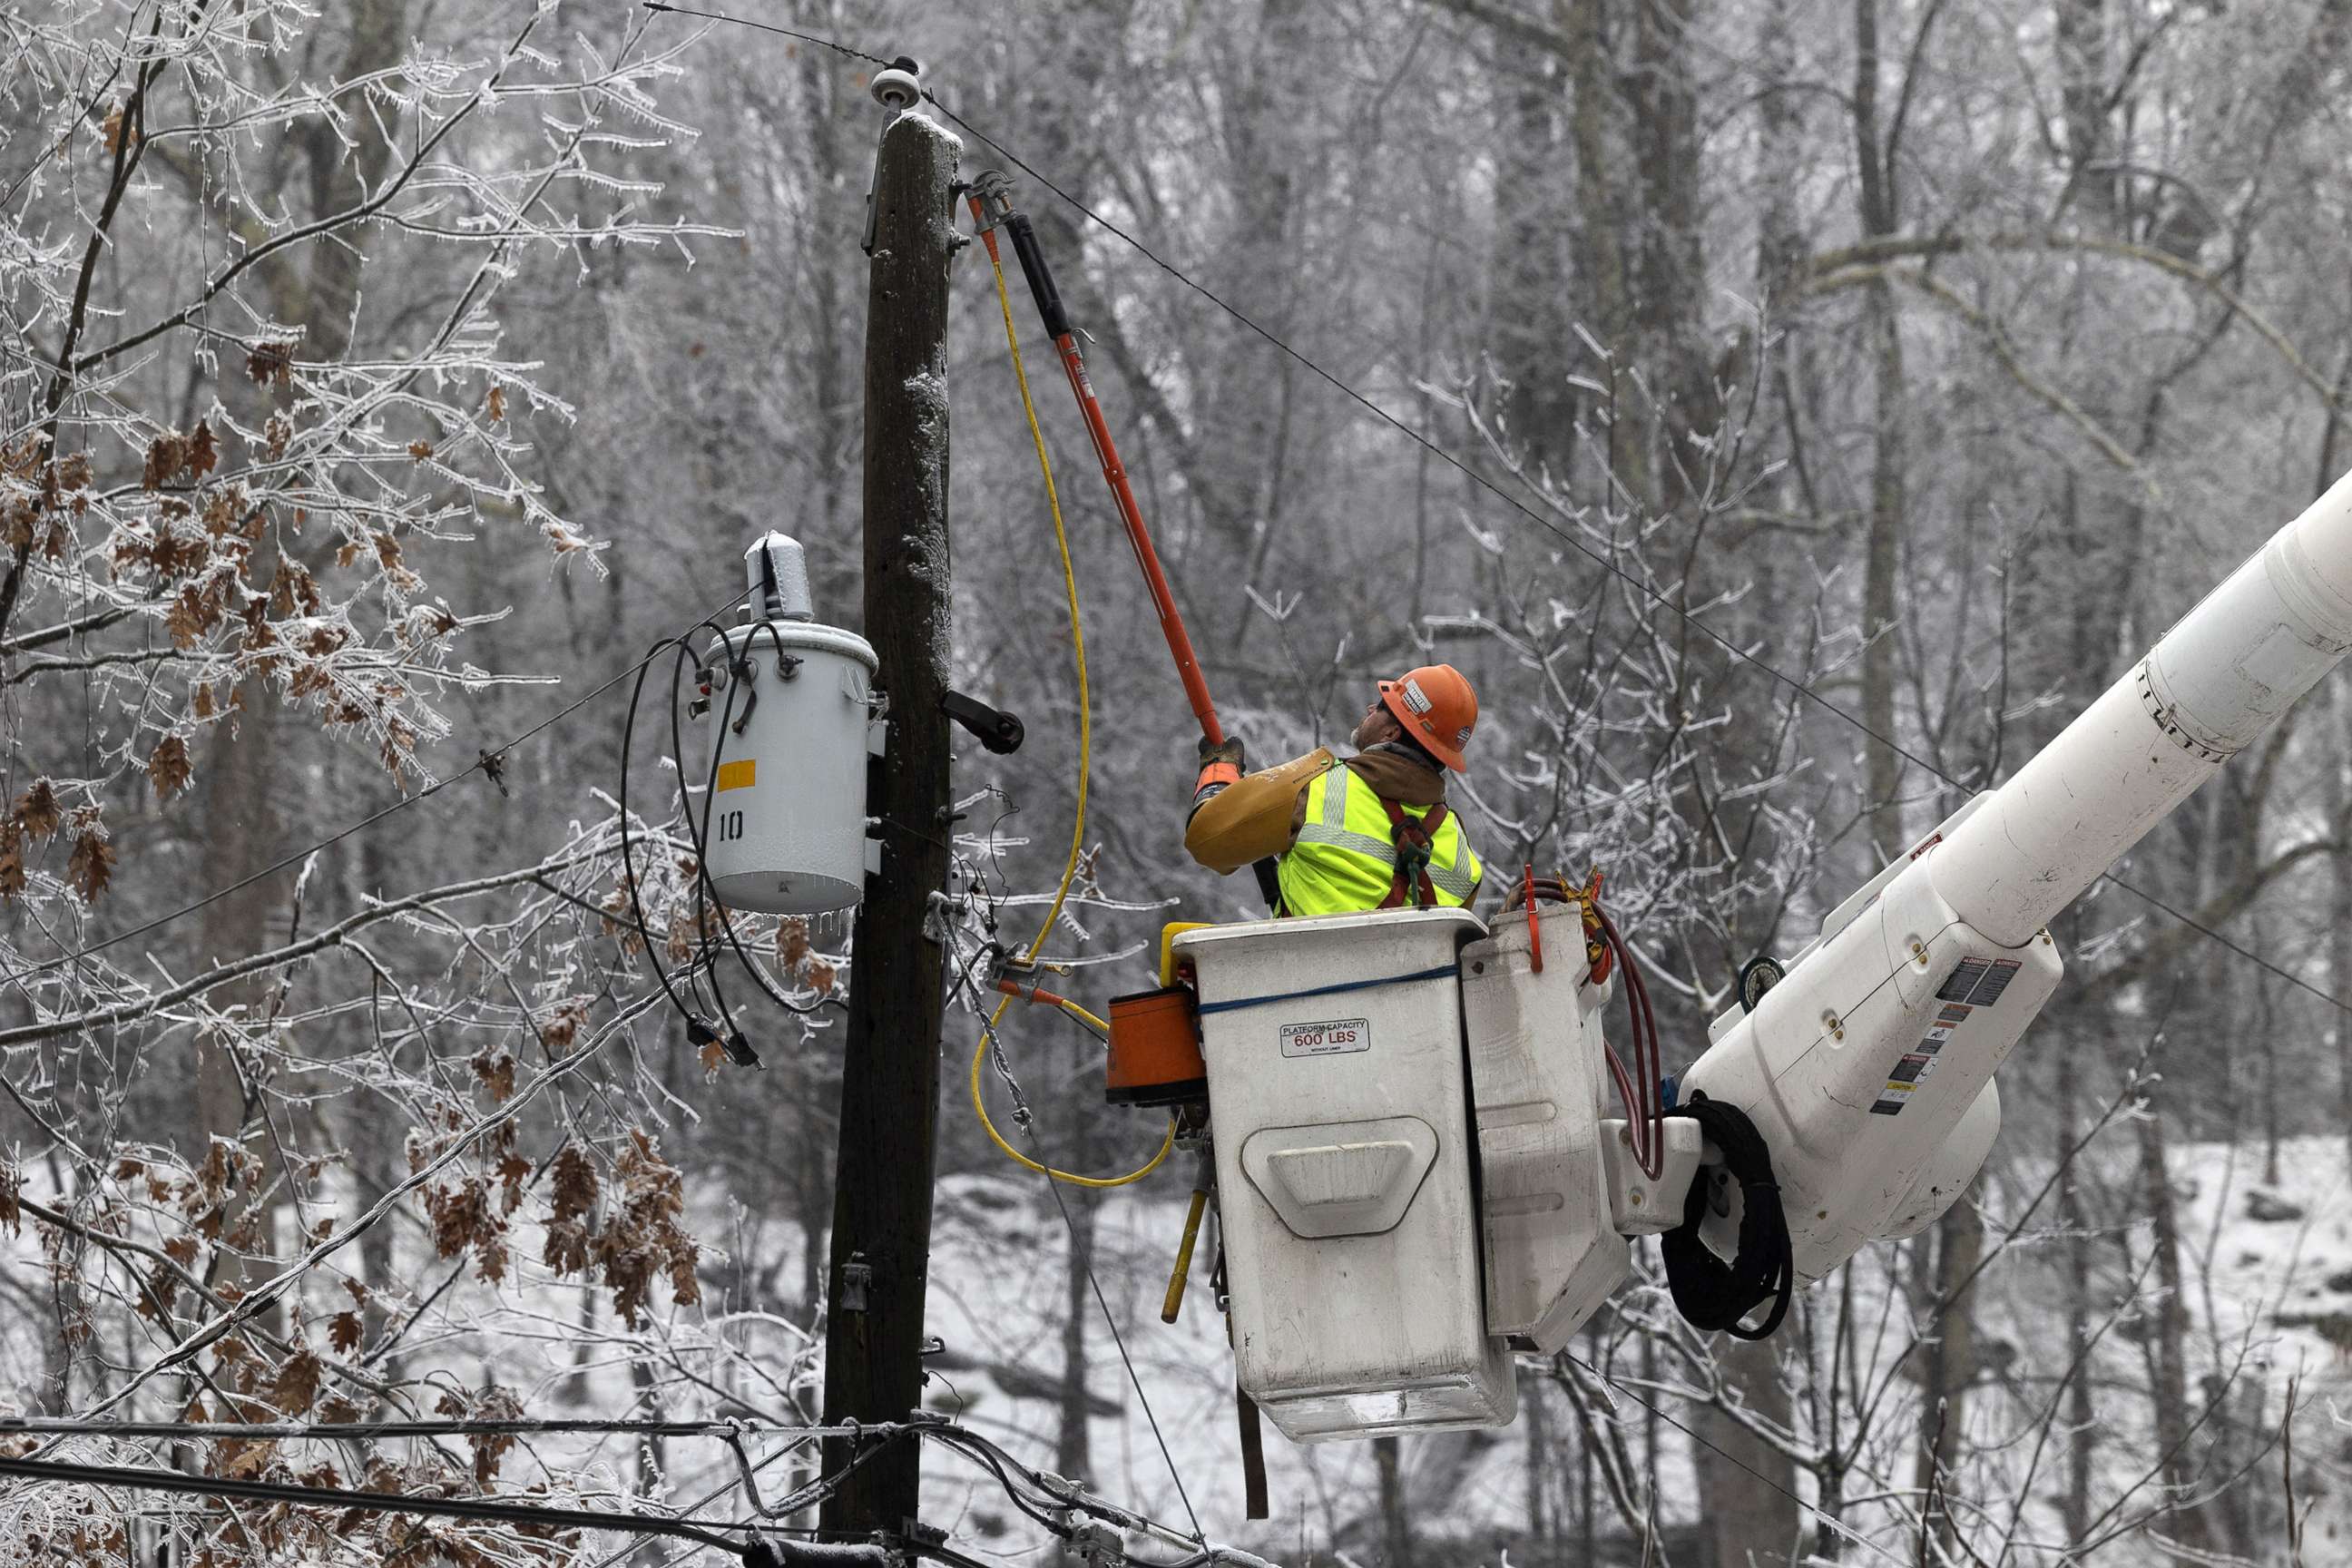 PHOTO: A worker fixes power lines following a winter storm near High Falls, N.Y., Feb. 7, 2022.